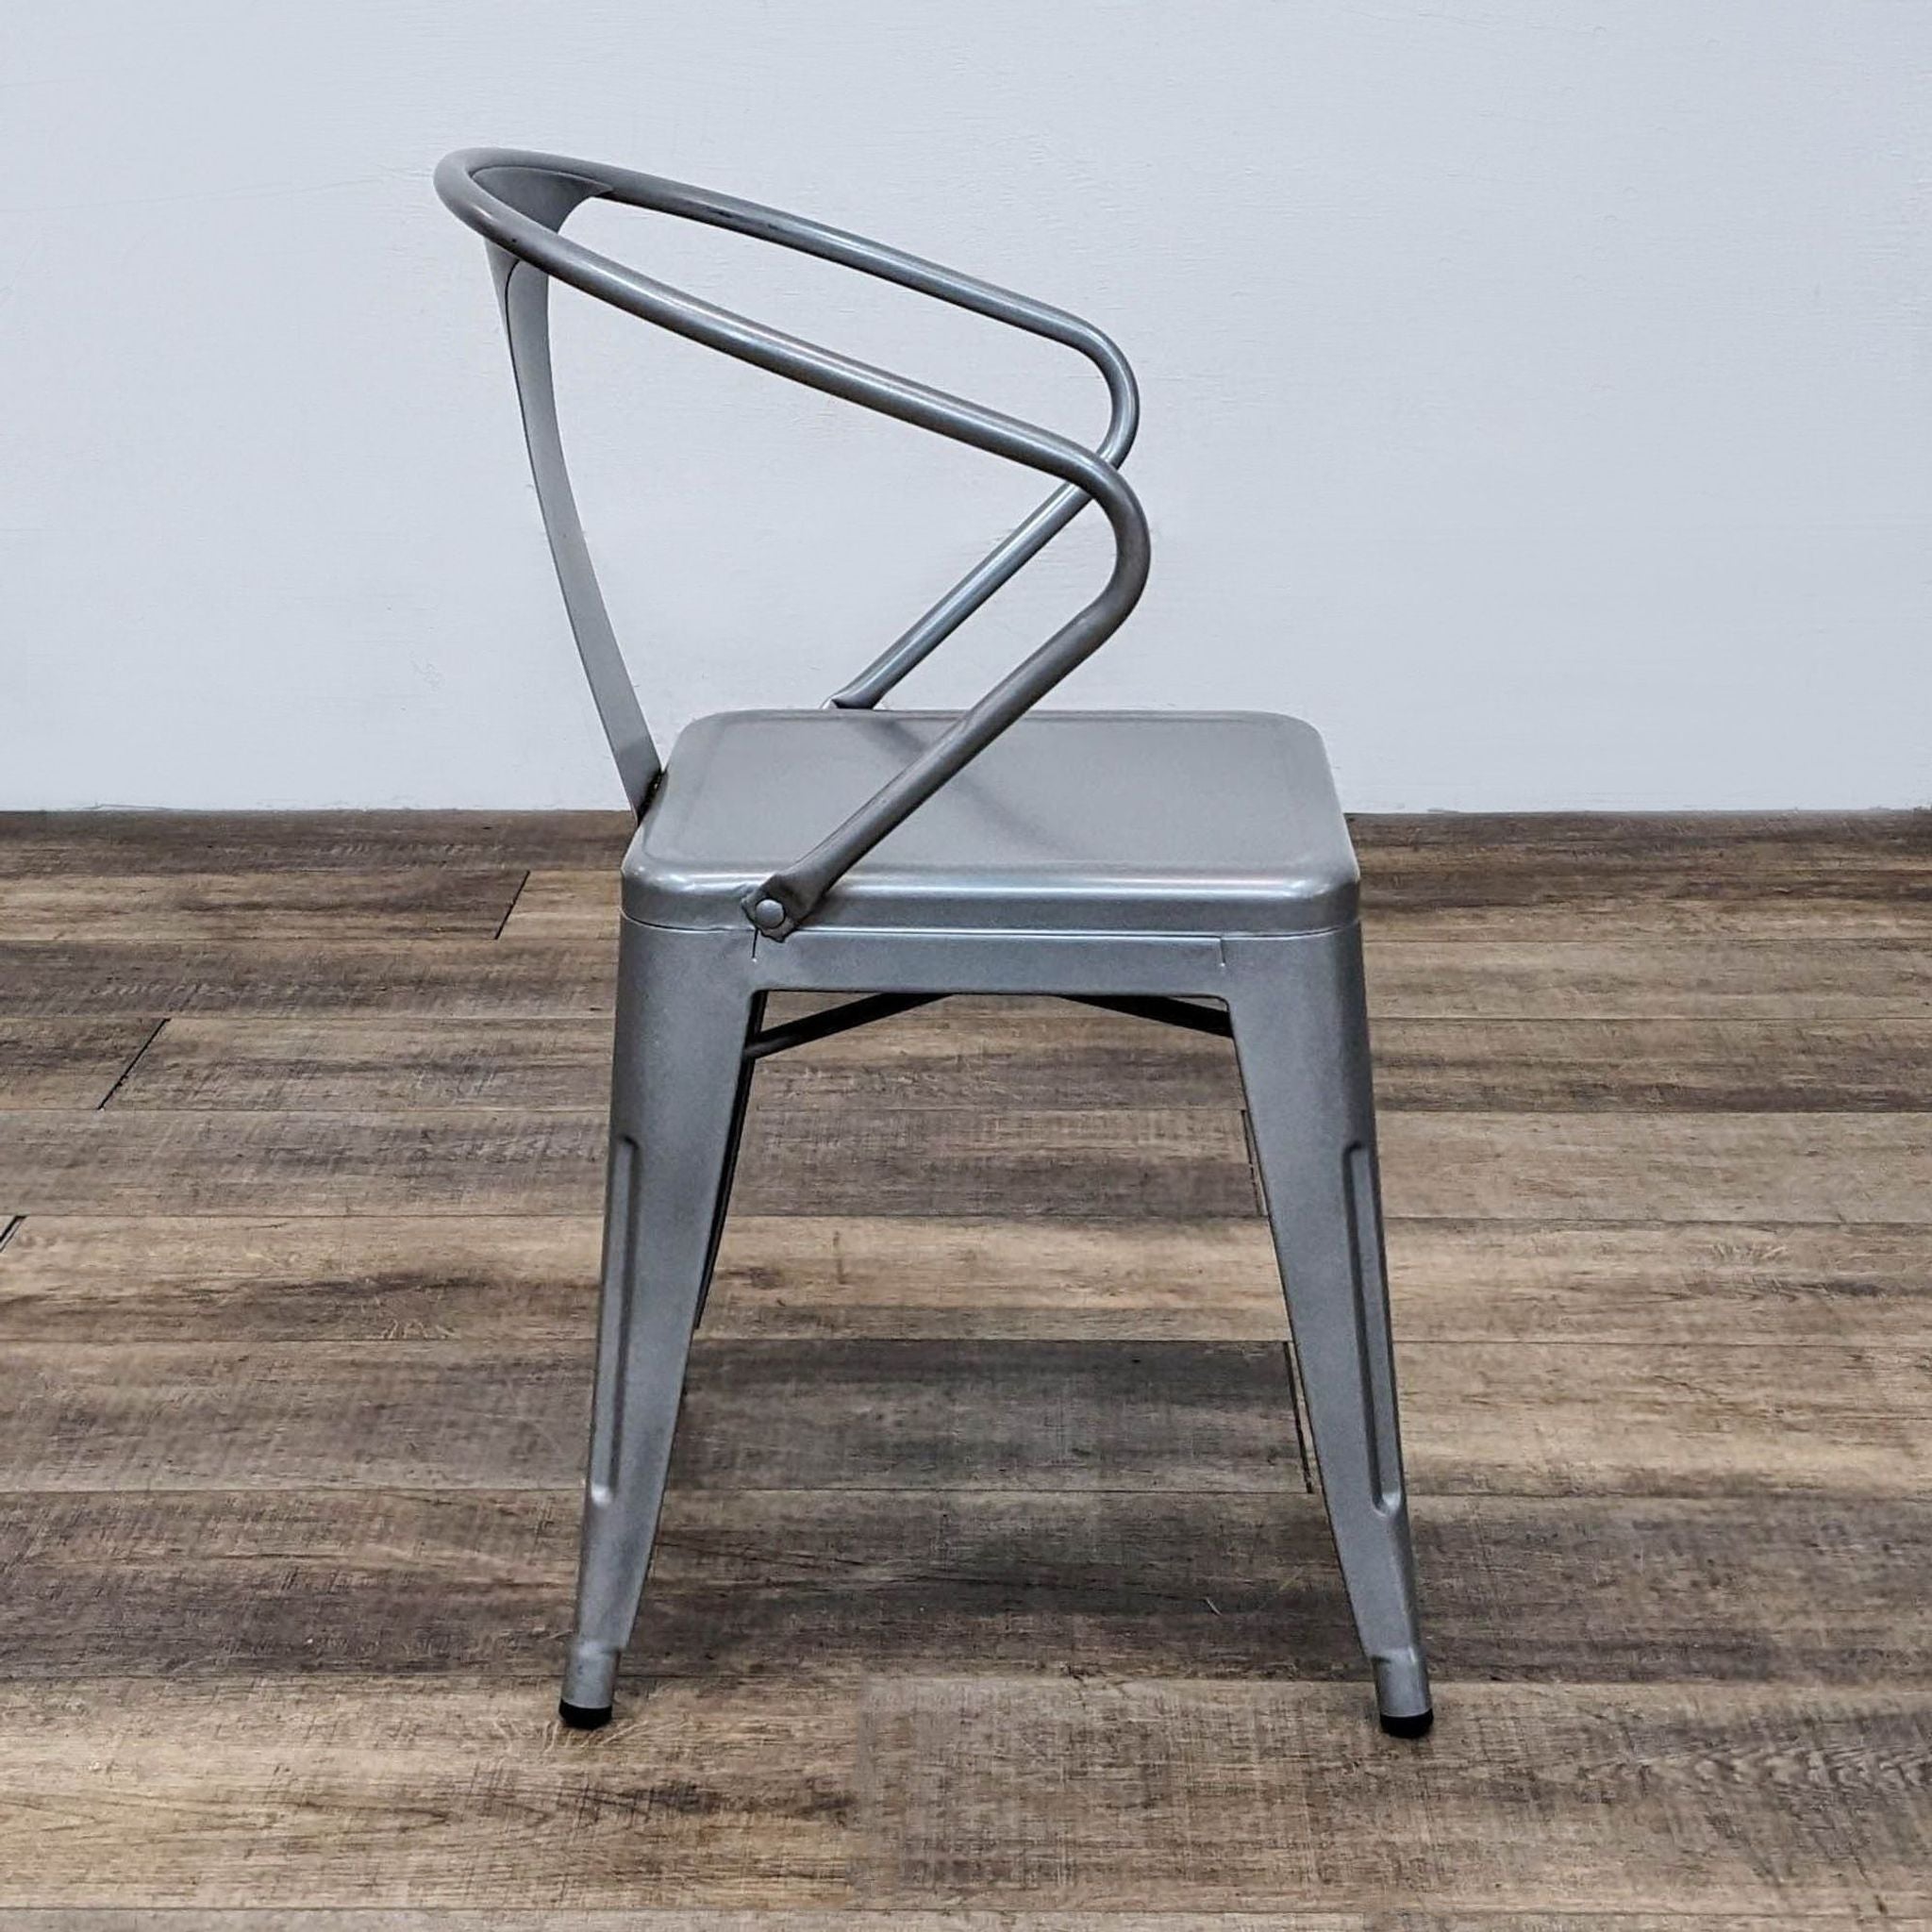 Side angle view of a gunmetal powder-coated Dimensions Tabouret chair showcasing industrial modern design, on a wooden floor.